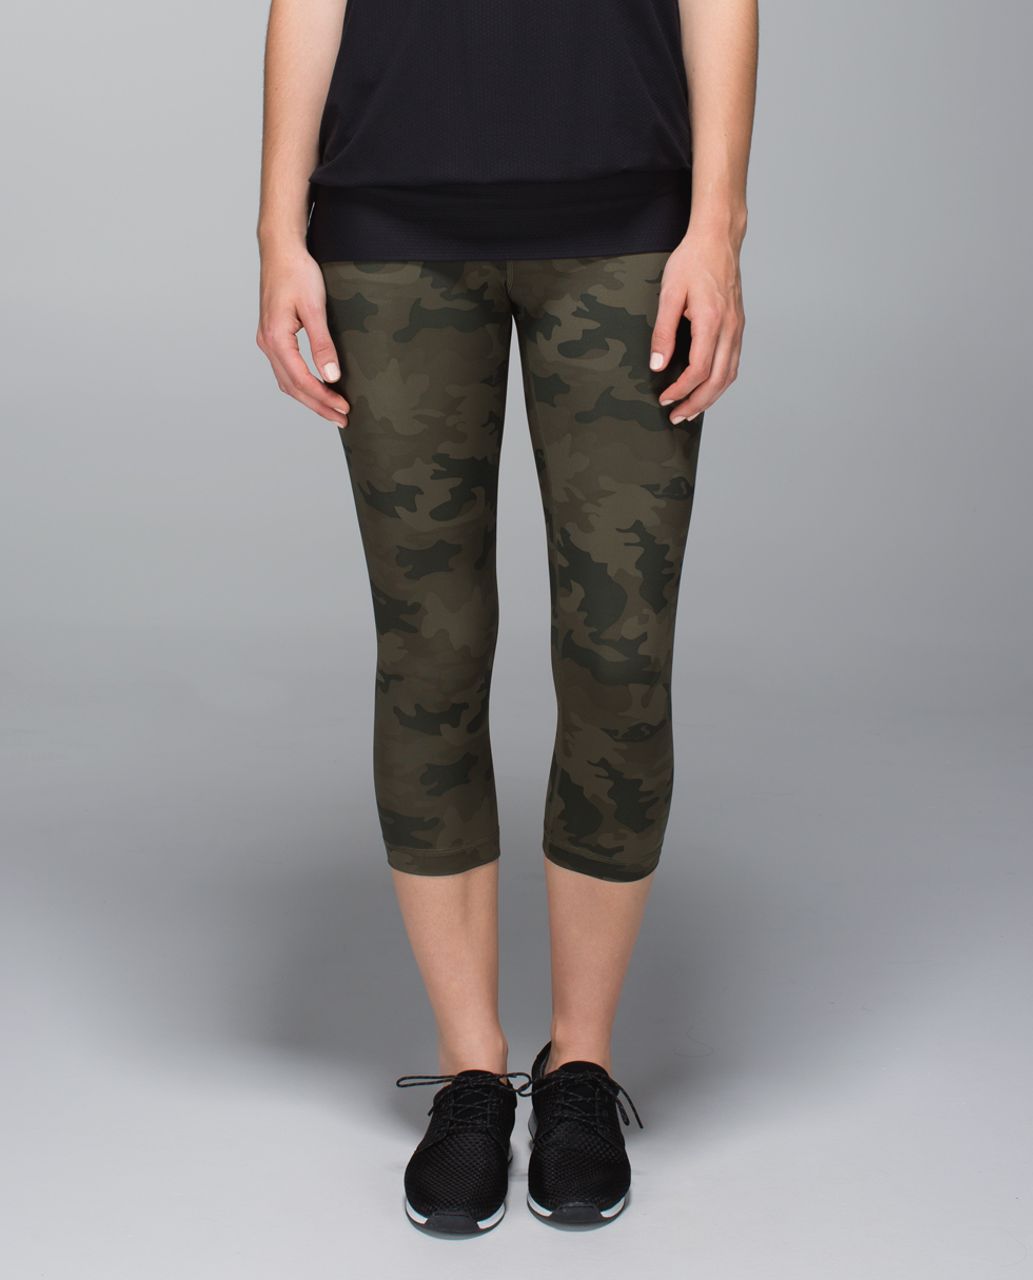 My Superficial Endeavors: Lululemon Wunder Under Crops in Wee Are From  Space Fatigue Green